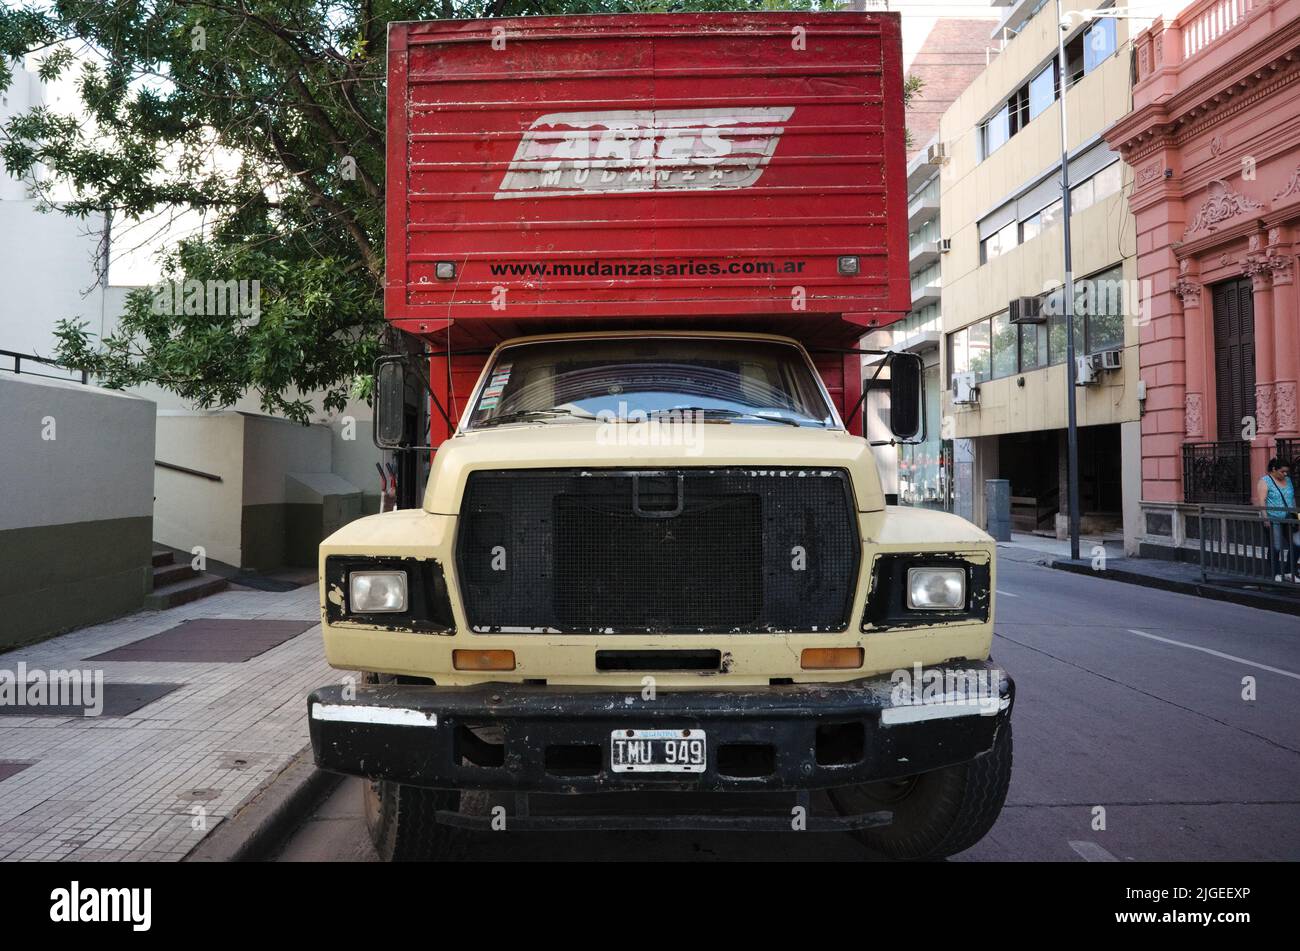 Buenos Aires, Argentina - January, 2020: Big old truck with beige cabin and red trailer. Old vintage lorry for cargo transportation Stock Photo